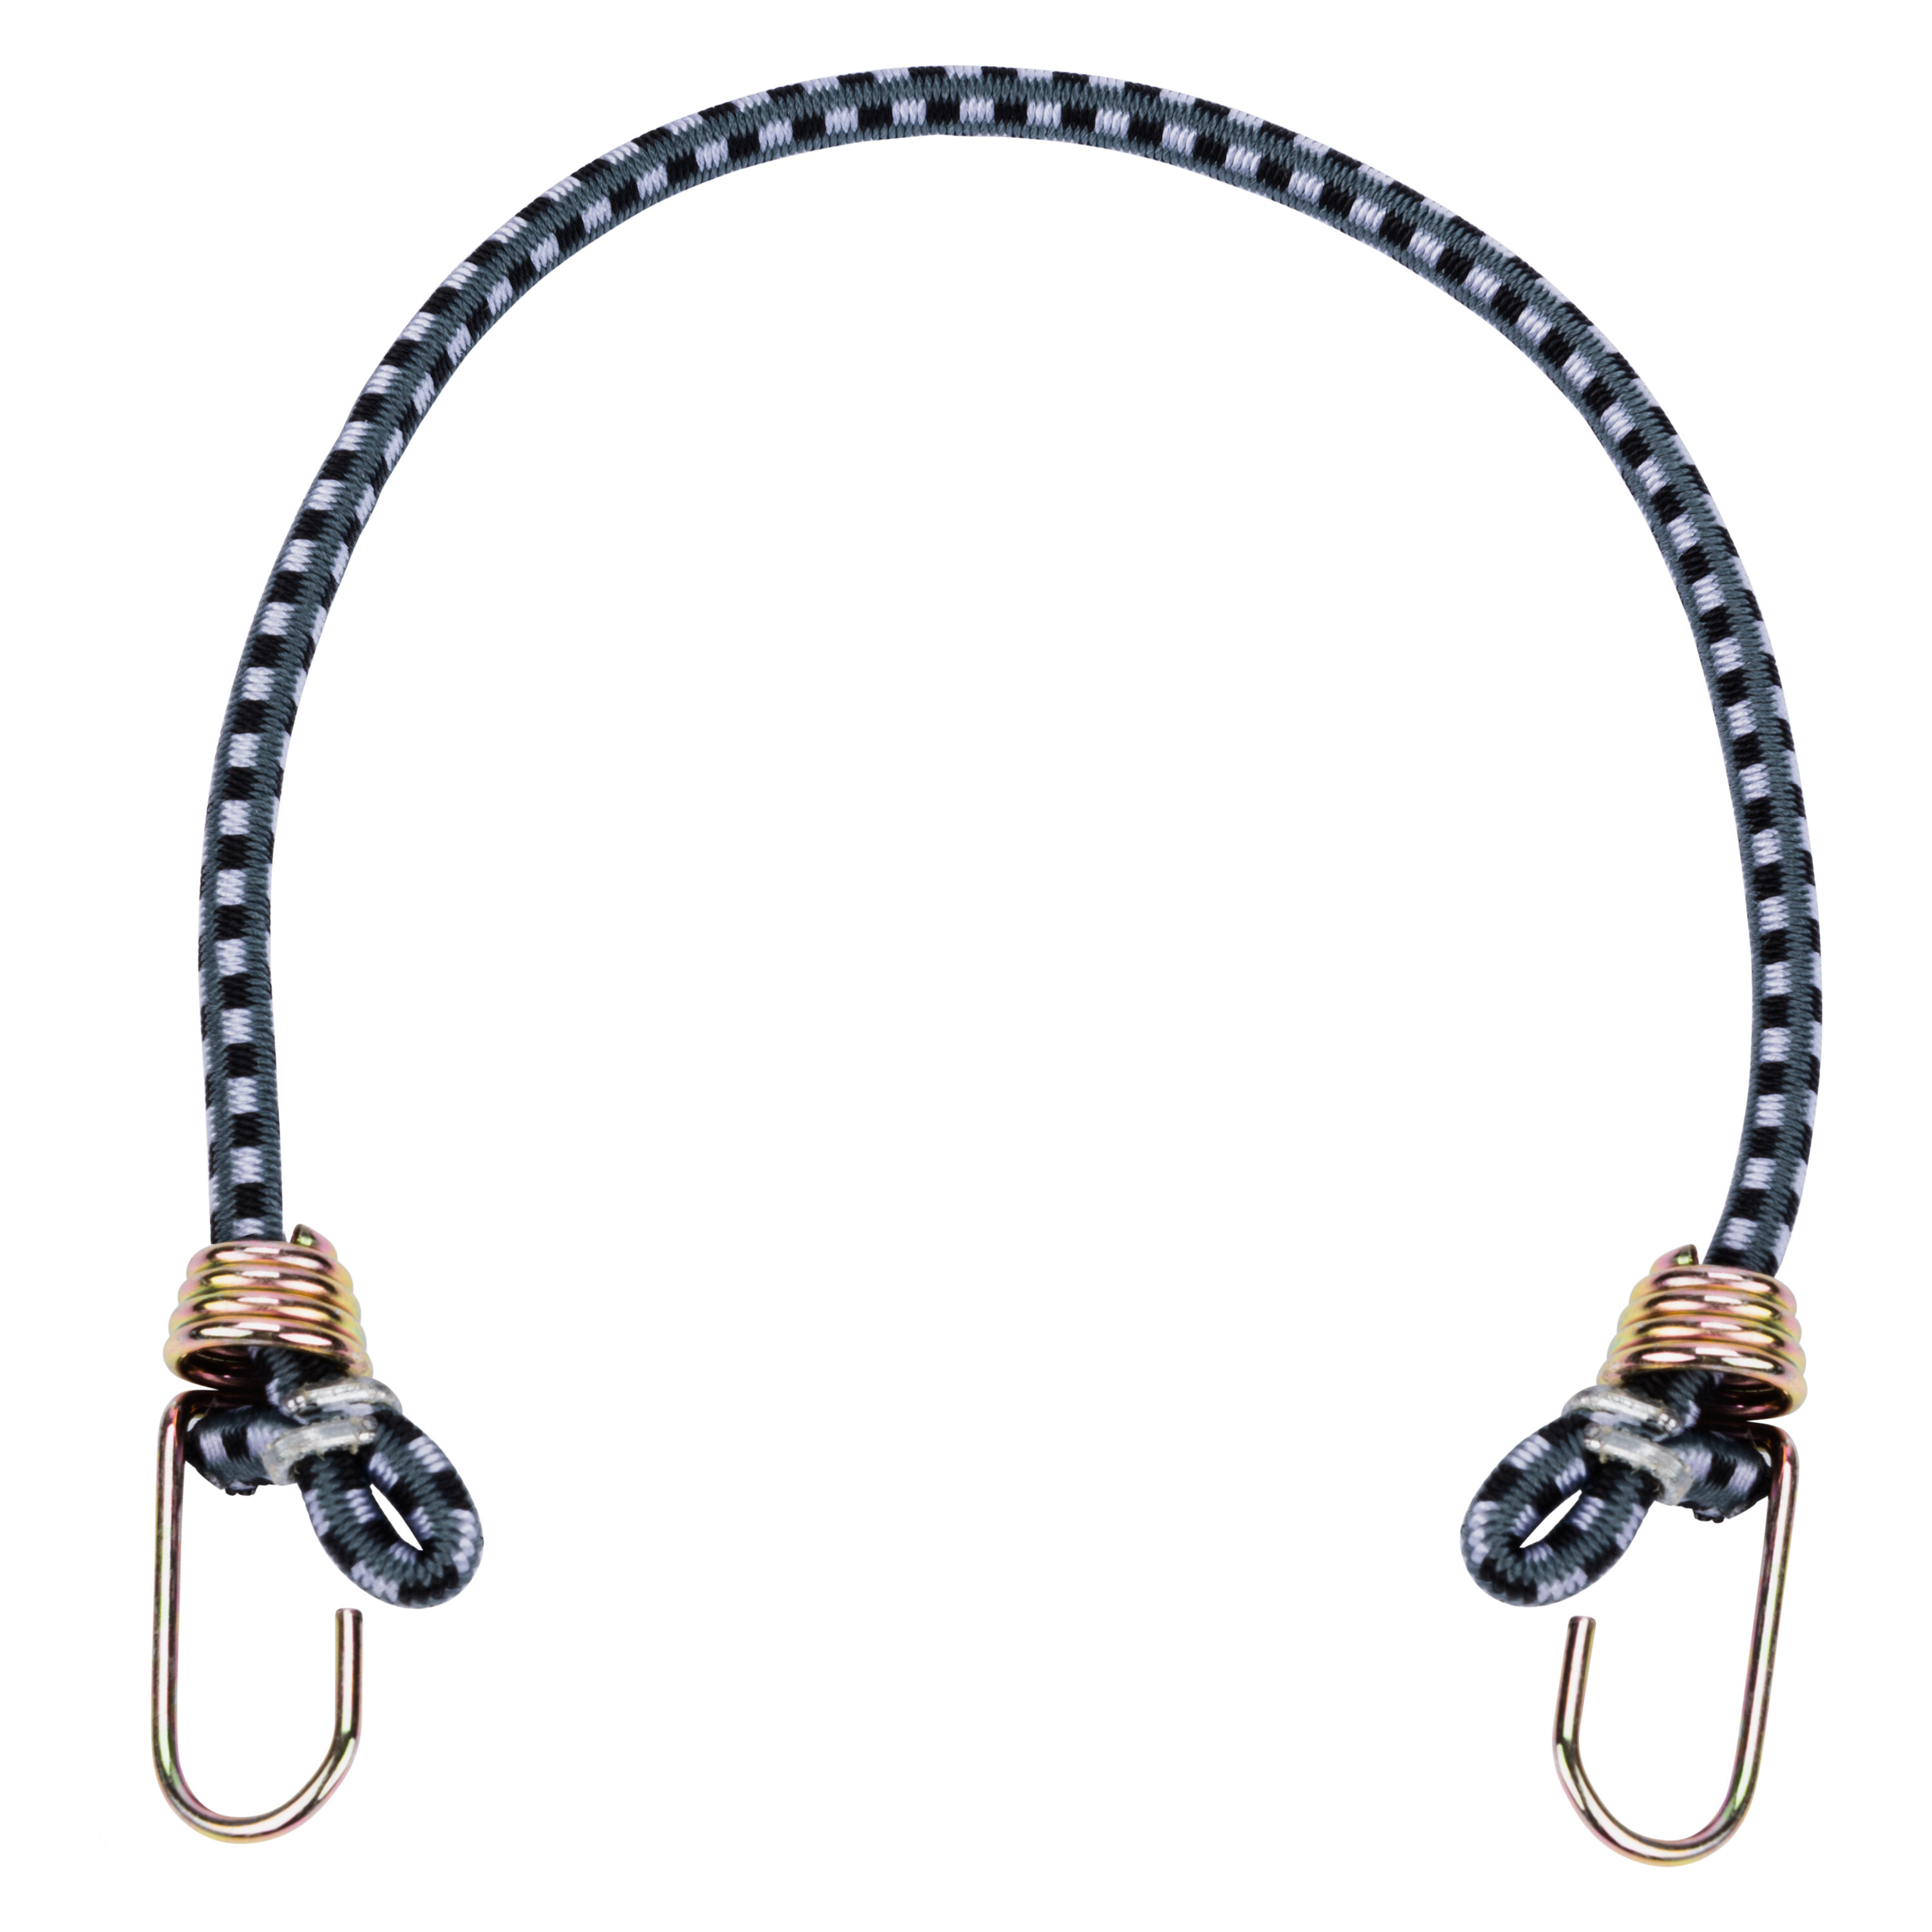 Keeper 06327 12 Piece Premium Bungee Cord with SST Hooks Jar